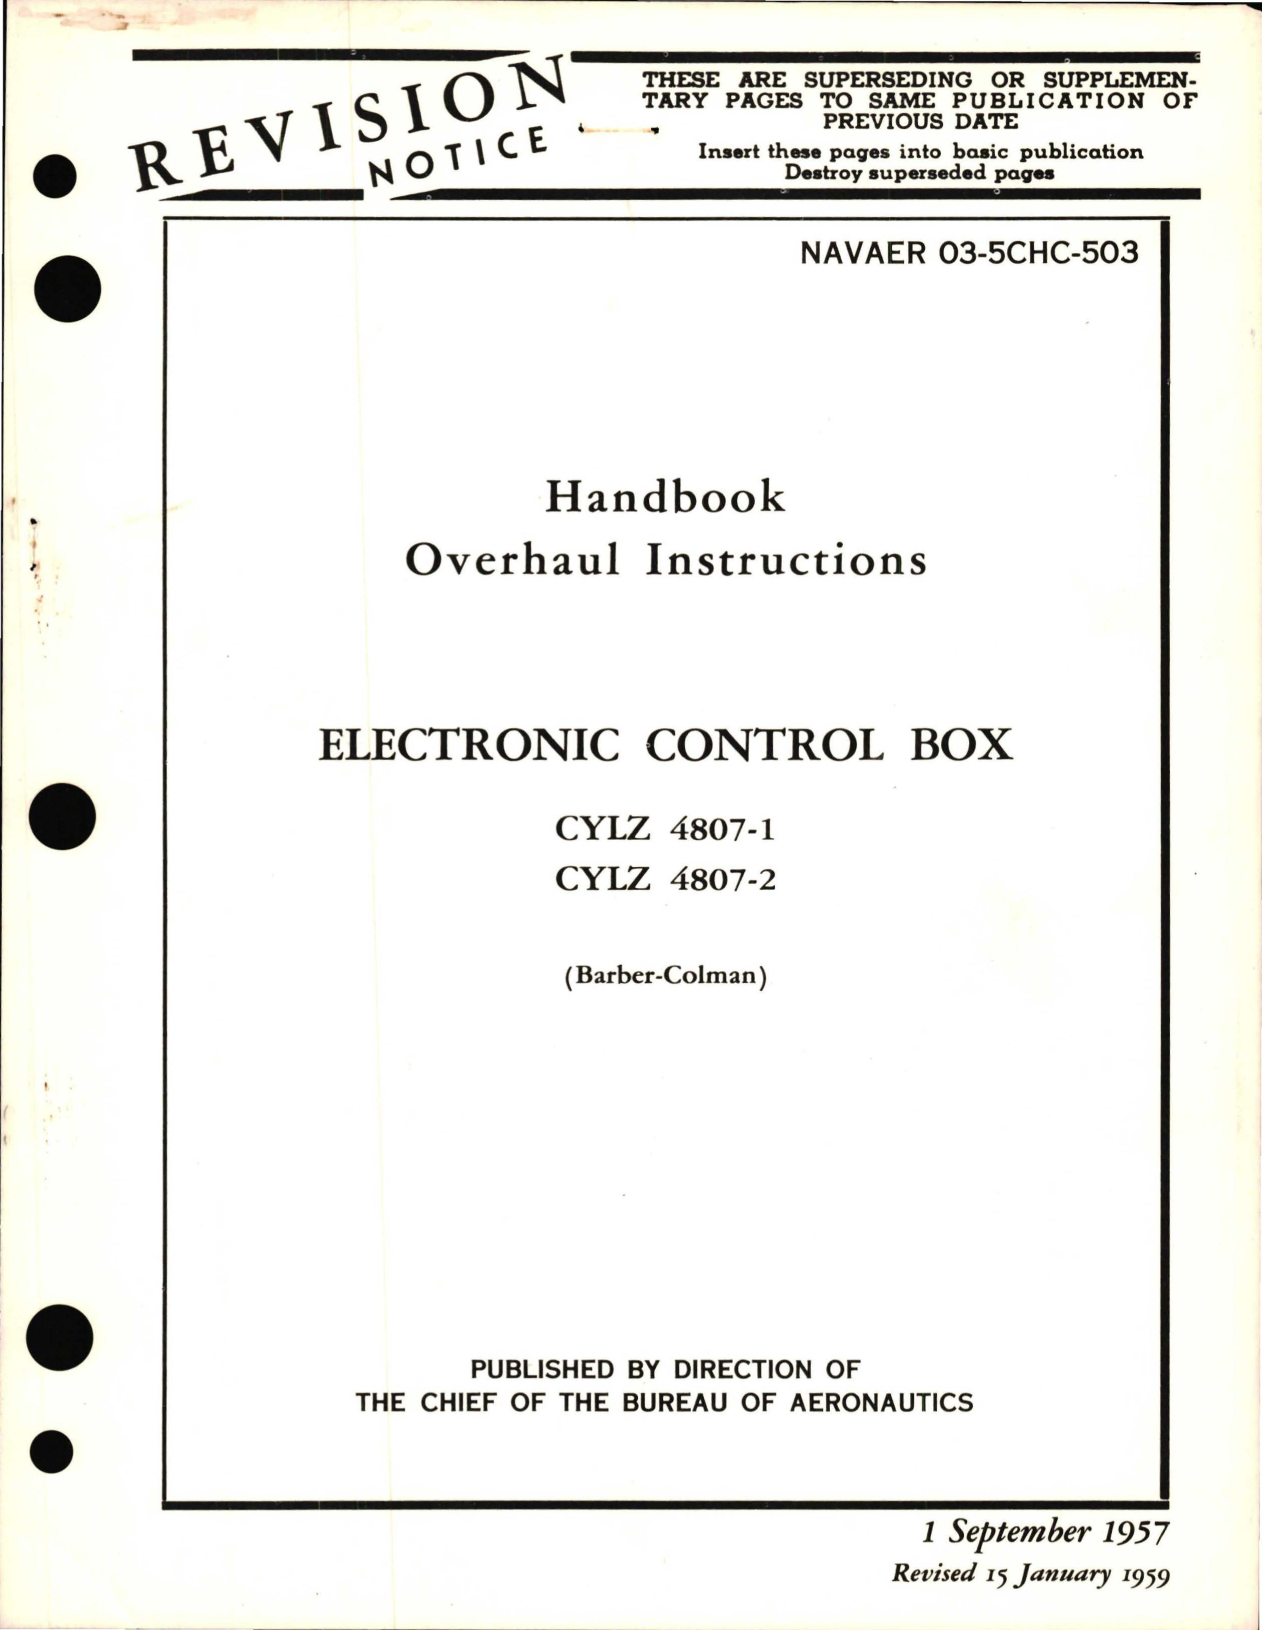 Sample page 1 from AirCorps Library document: Overhaul Instructions for Electronic Control Box - CYLZ 4807-1 and CYLZ 4807-2